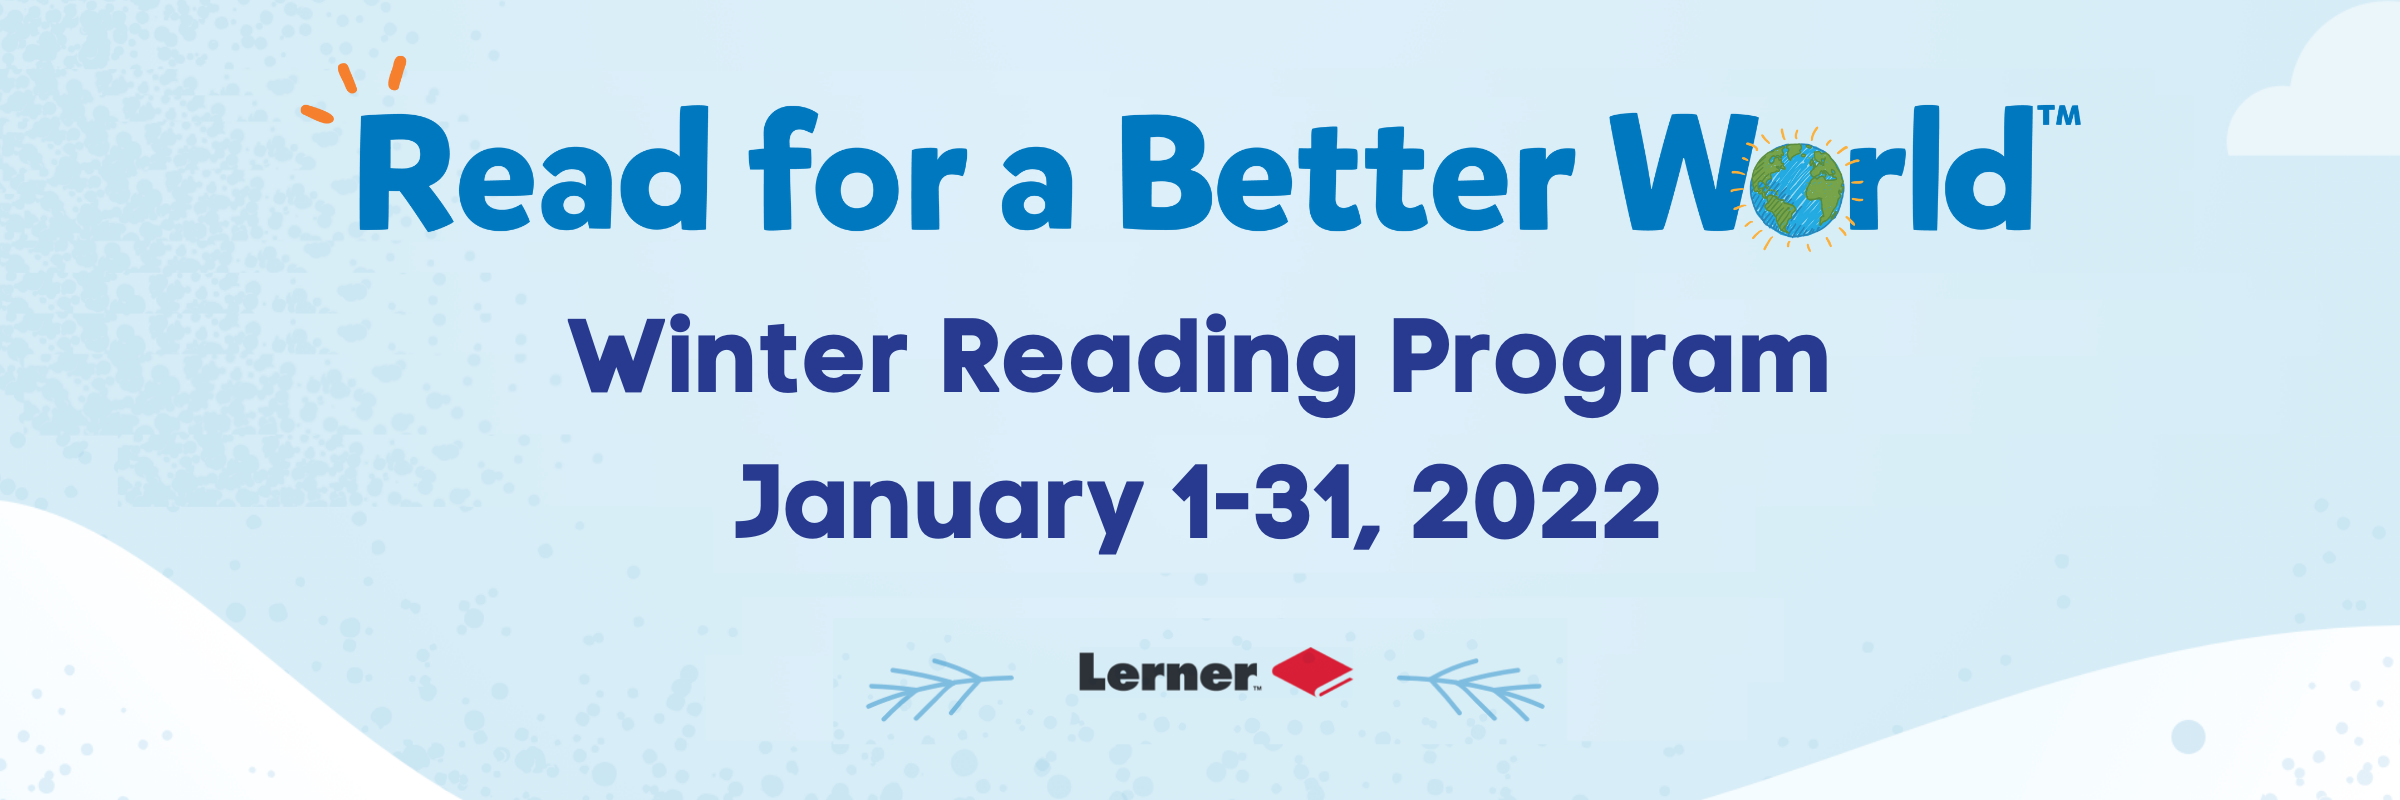 Winter background with text: "Read for a Better World: Winter Reading Program. January 1-31, 2022." with Lerner logo